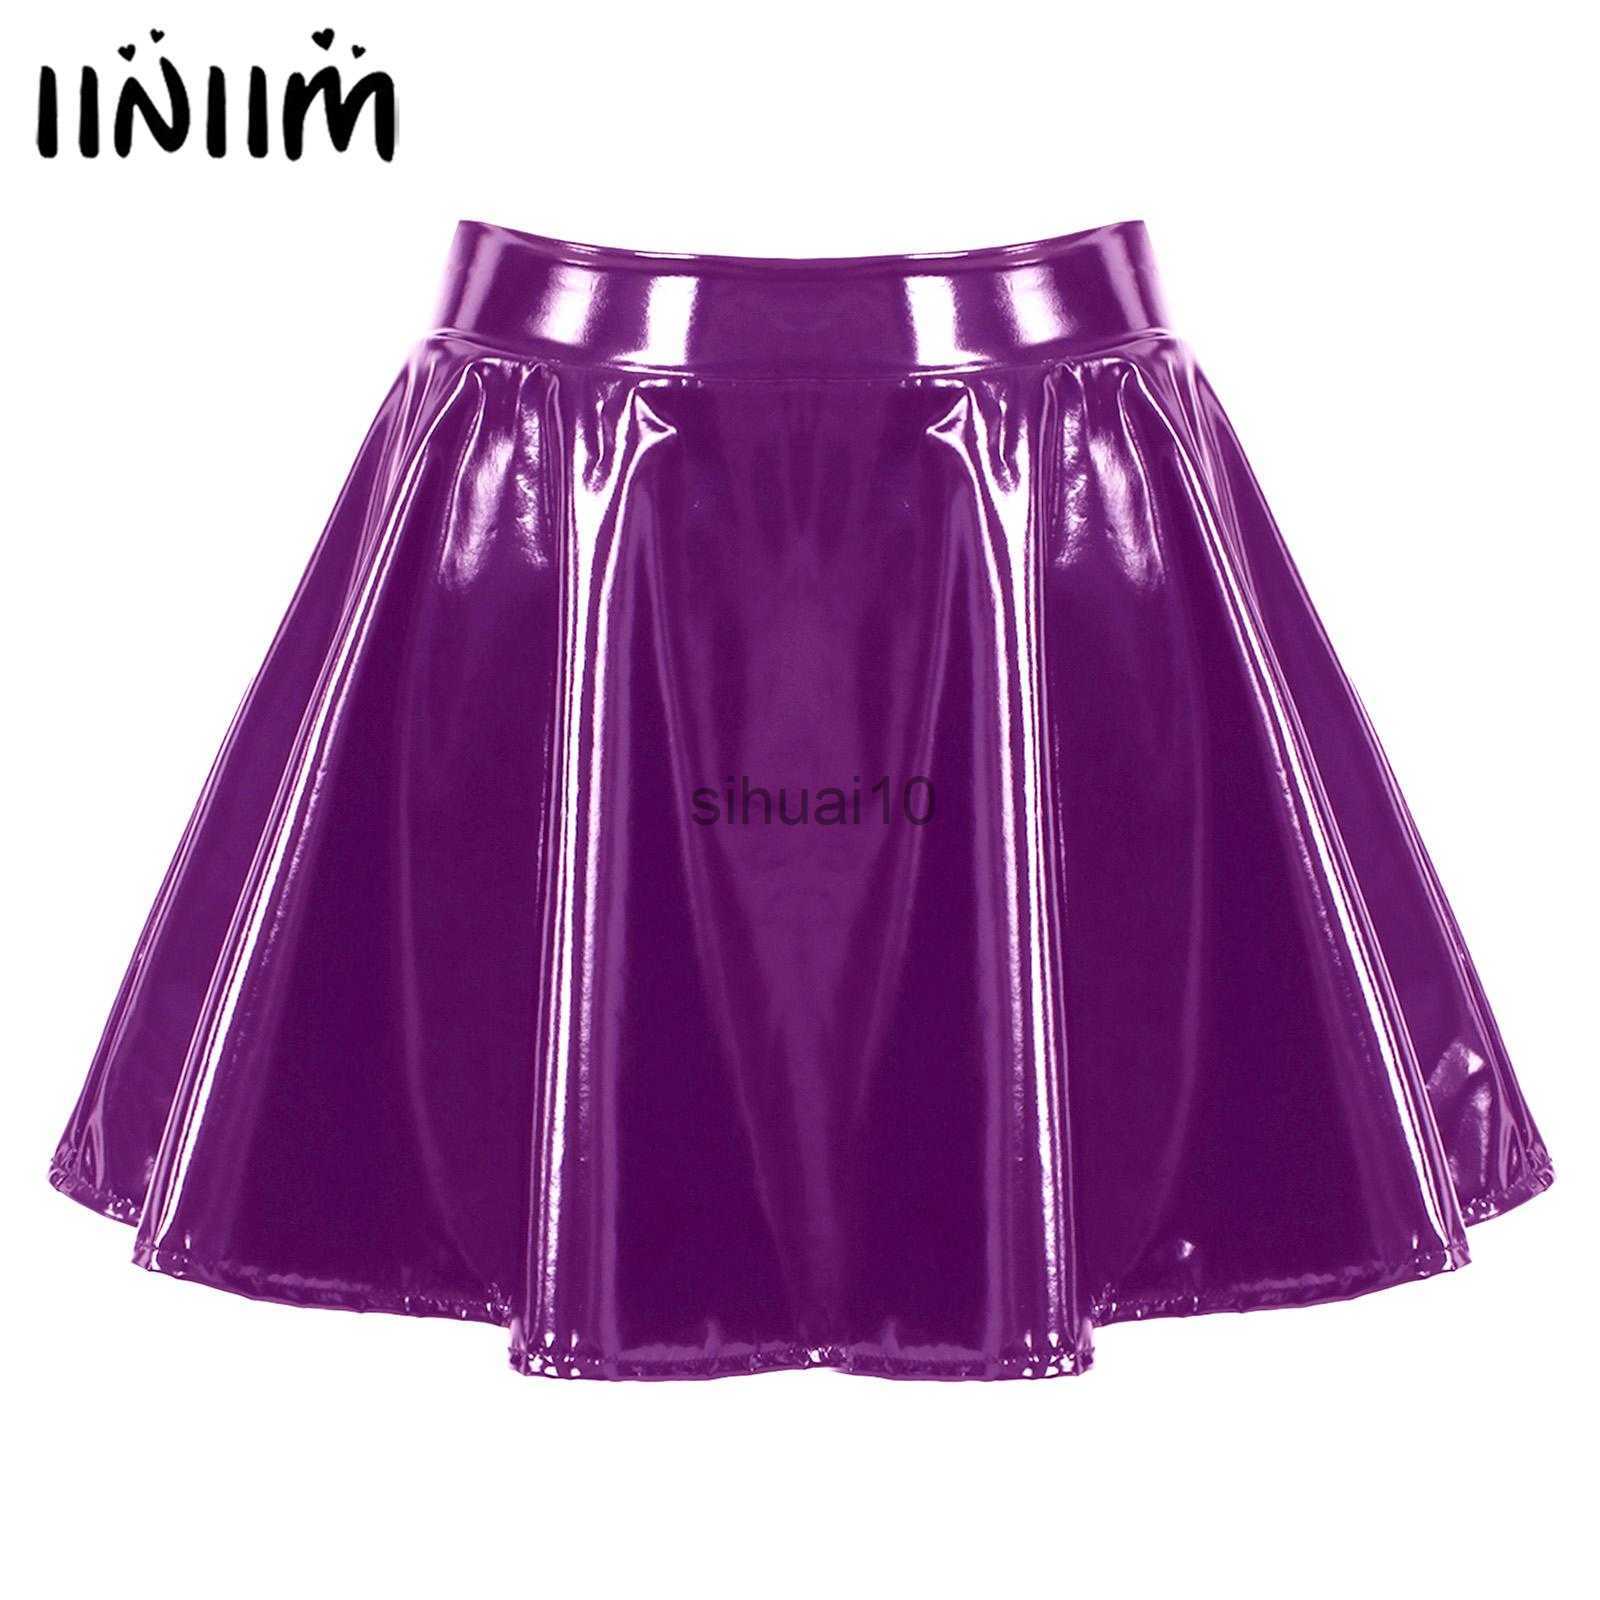 

Skirts Womens Glossy Patent Leather Flared Miniskirt Dance Performance Invisible Zipper A-Line Mini Skirts Clubwear Cosplay Come J230621, Purple